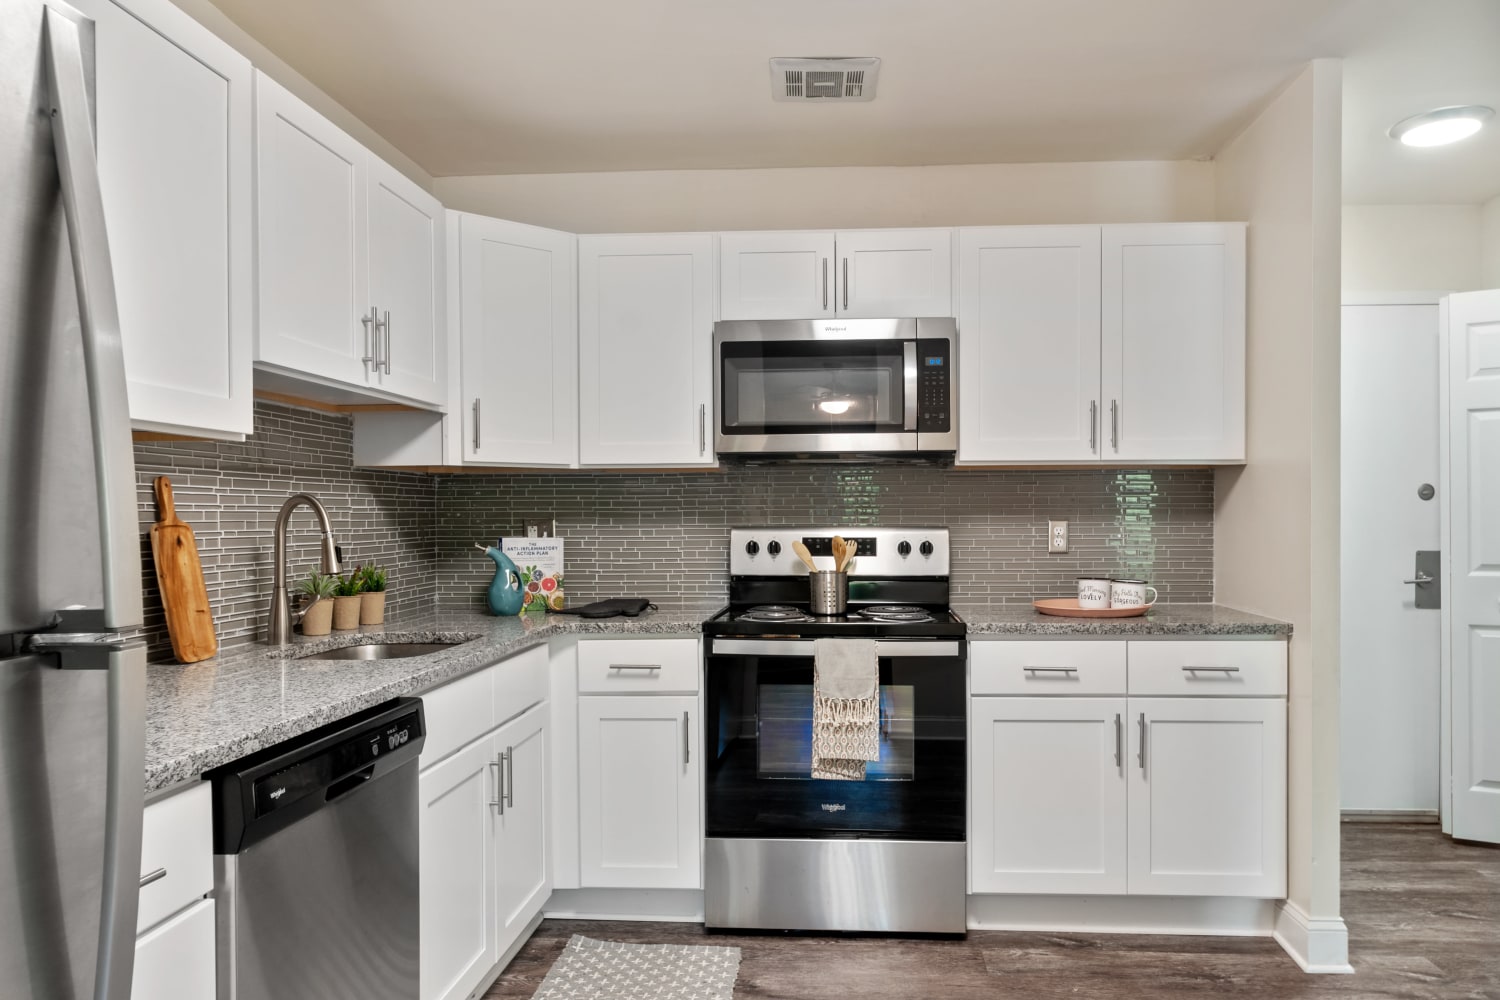 Kitchen area at Timberlake Apartment Homes in East Norriton, Pennsylvania